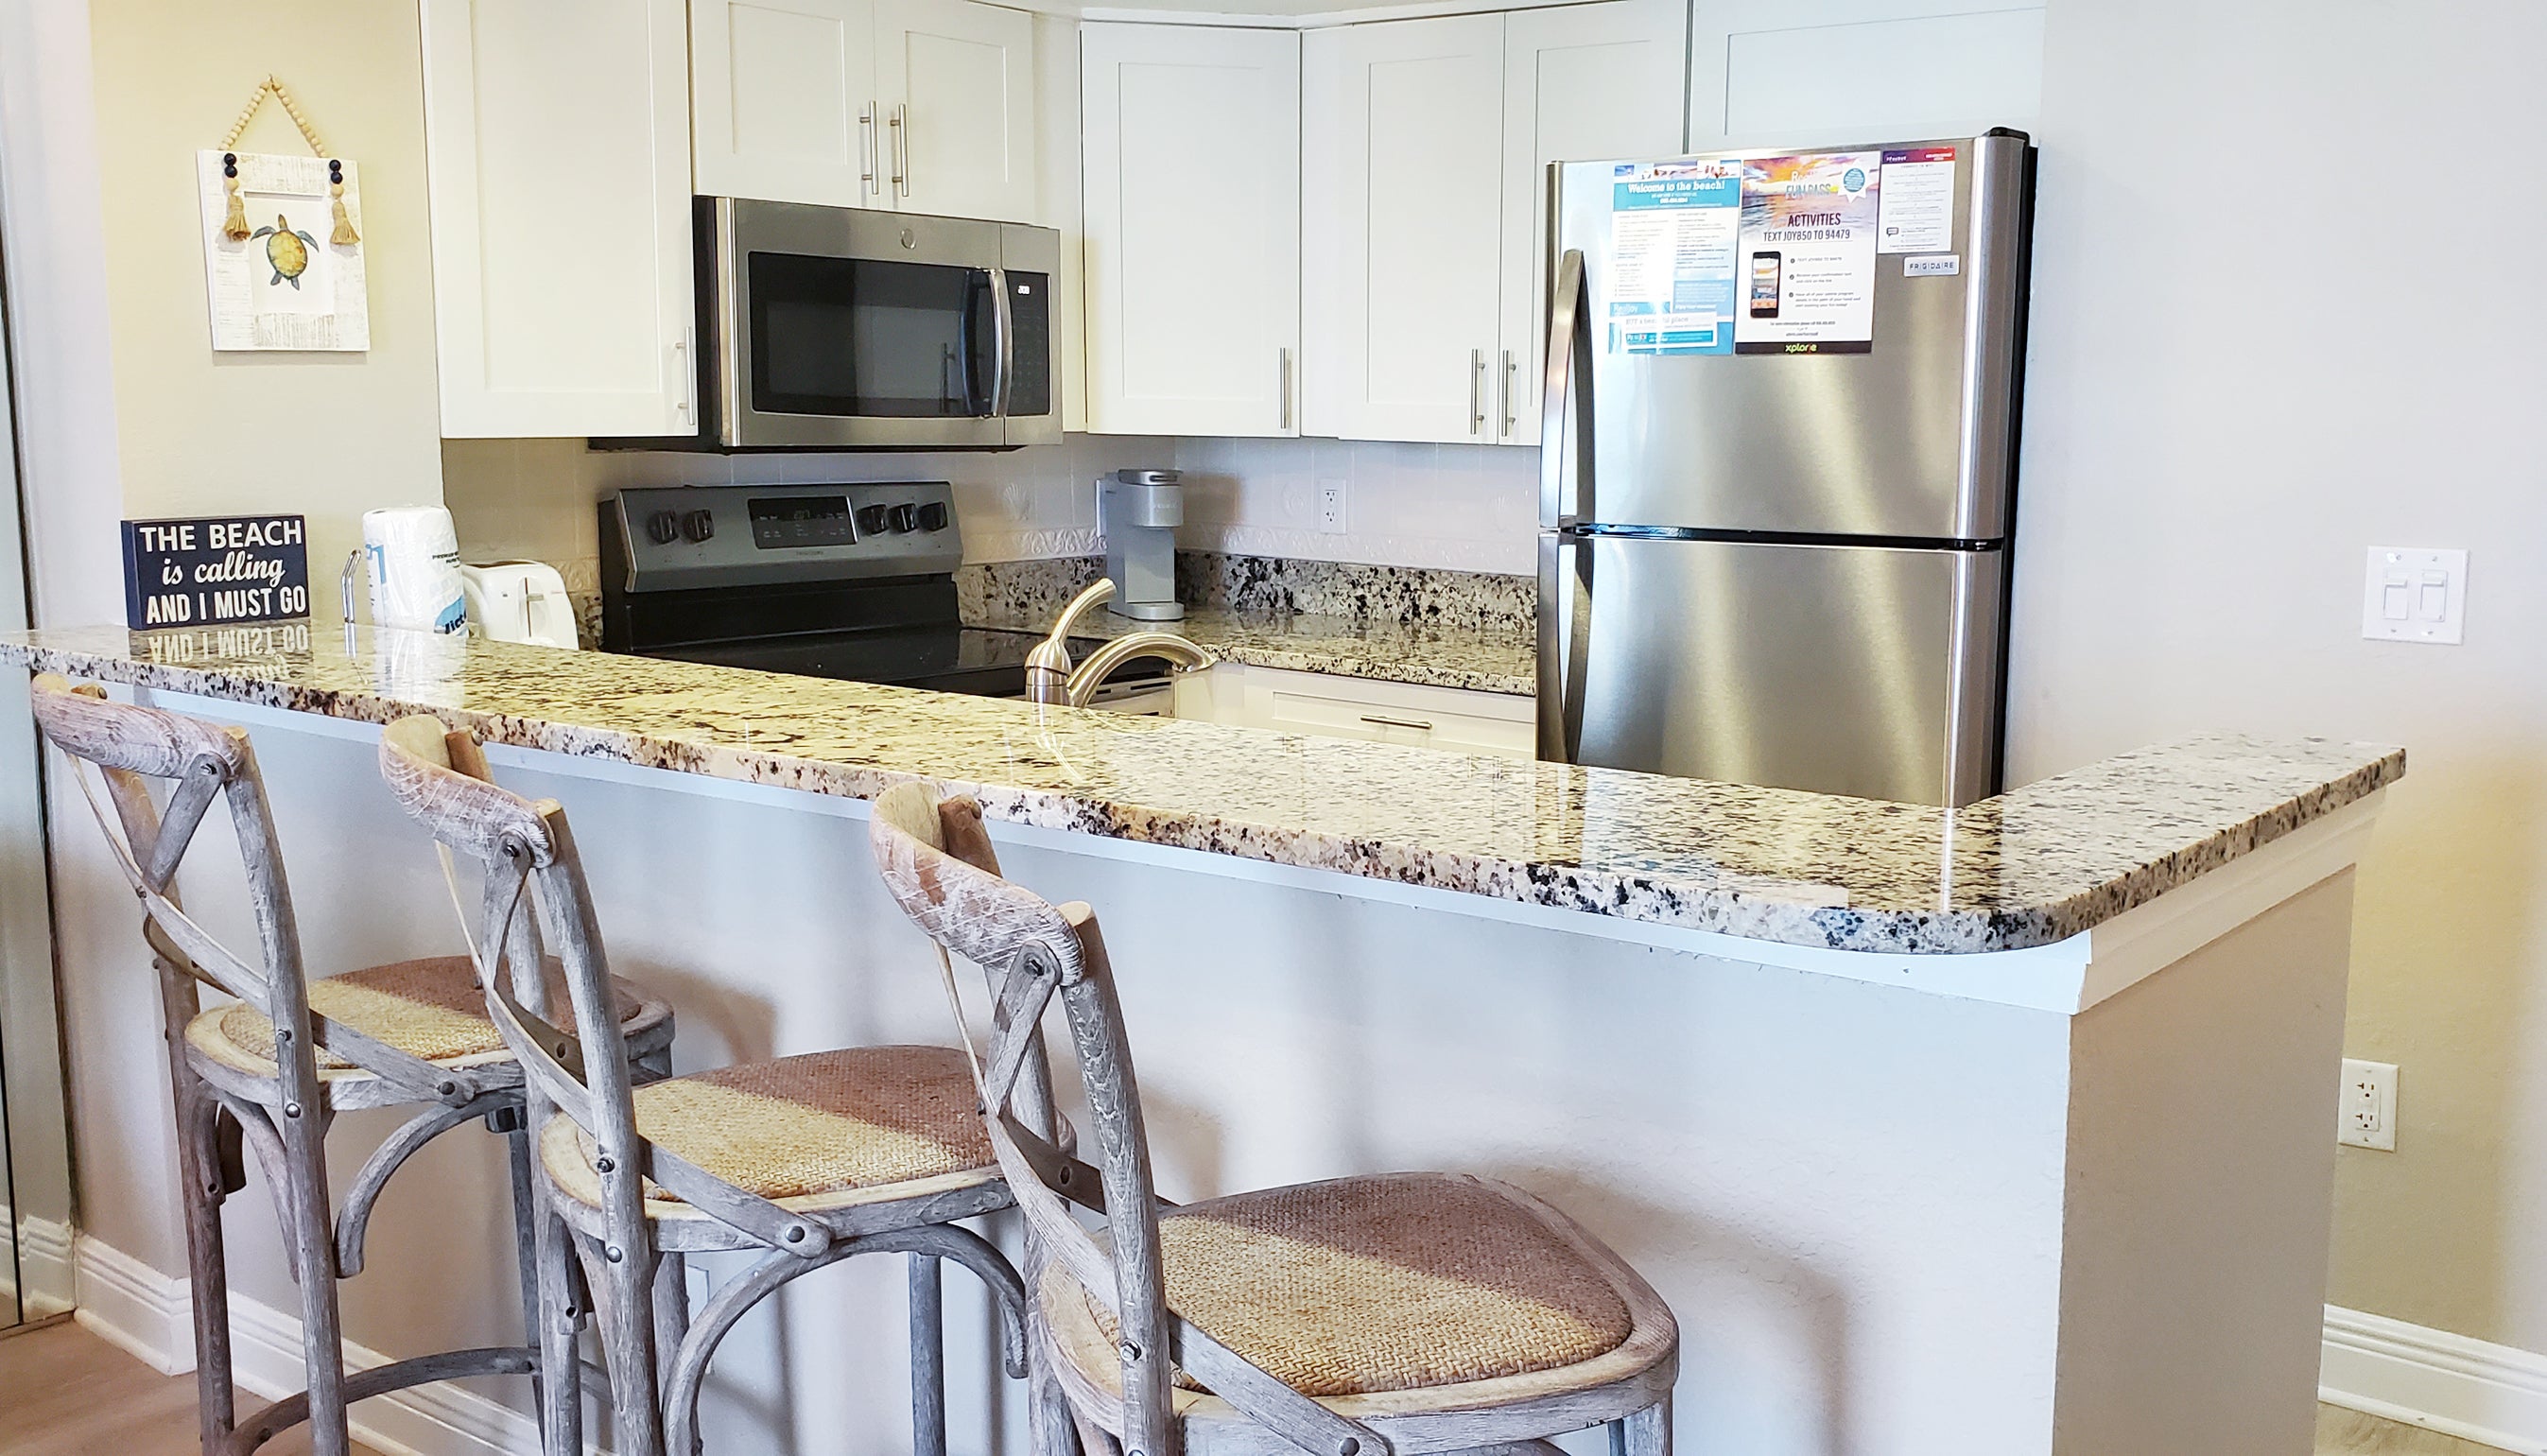 Kitchen Counter tops upgraded May 2020